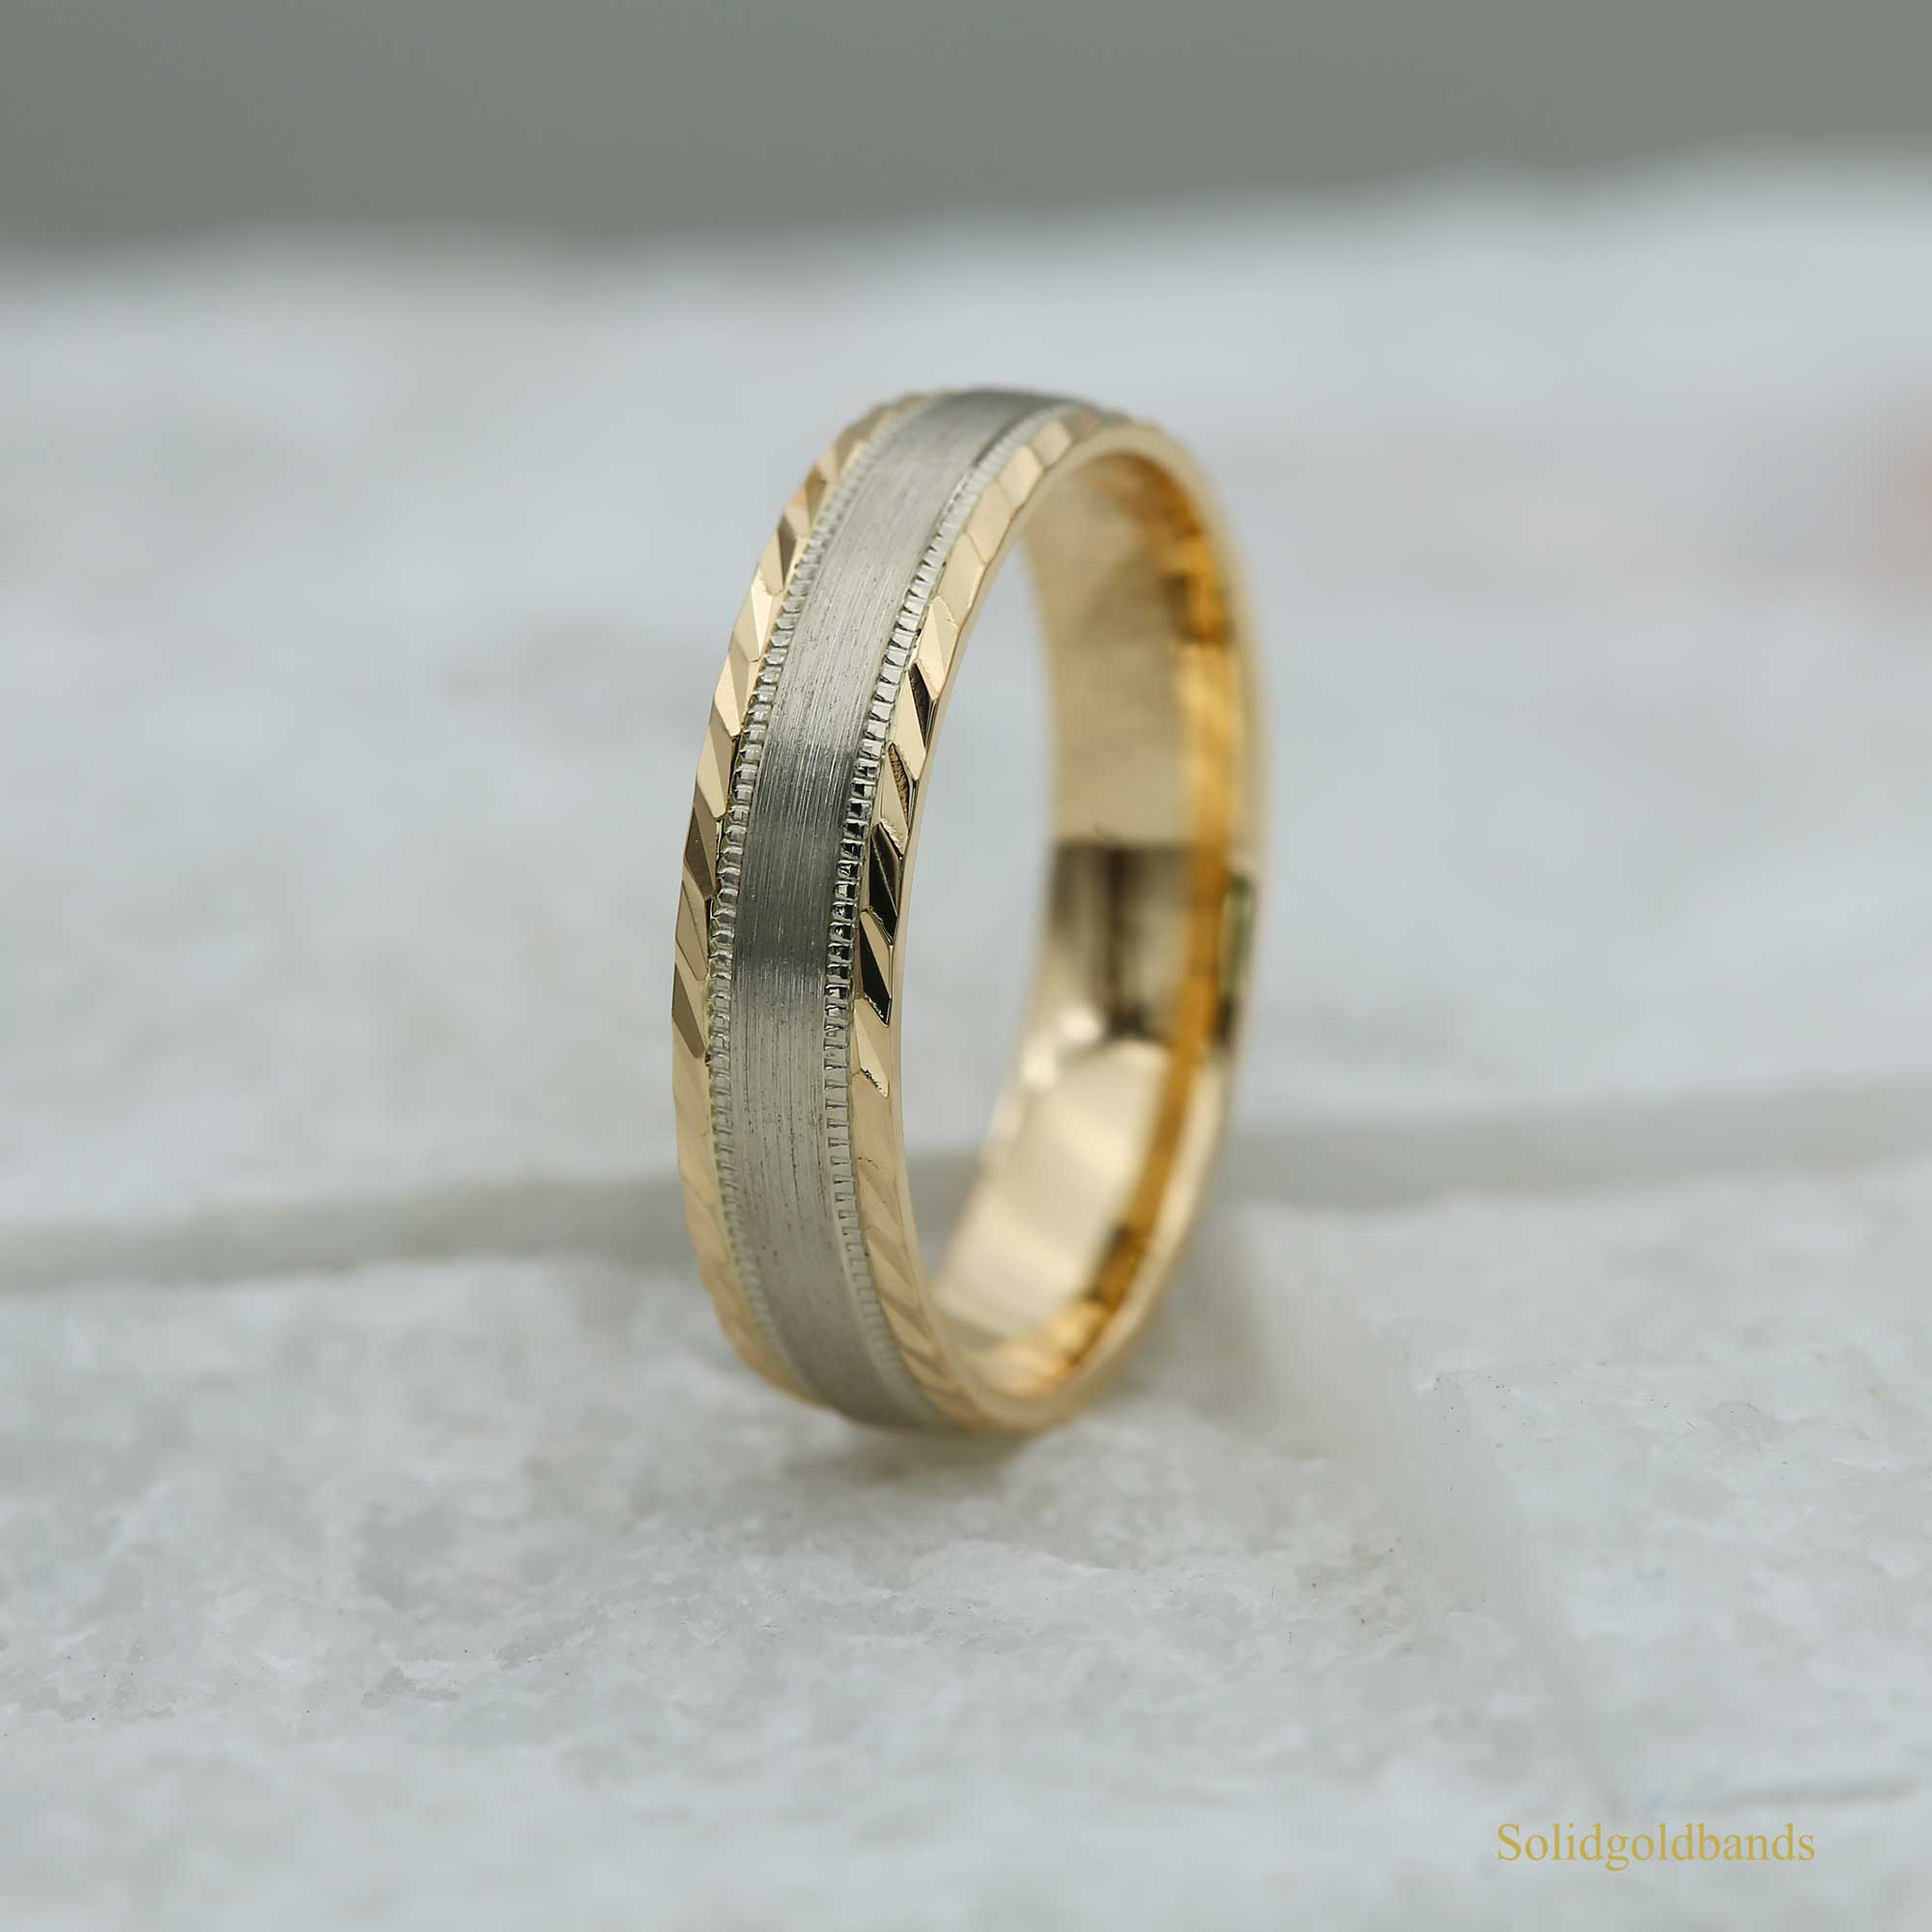 6mm Solid gold Wedding Band  10K 14K 18K, white Gold, yellow Gold, High Polished Milgrain Dome, Classic, simple engagement ring